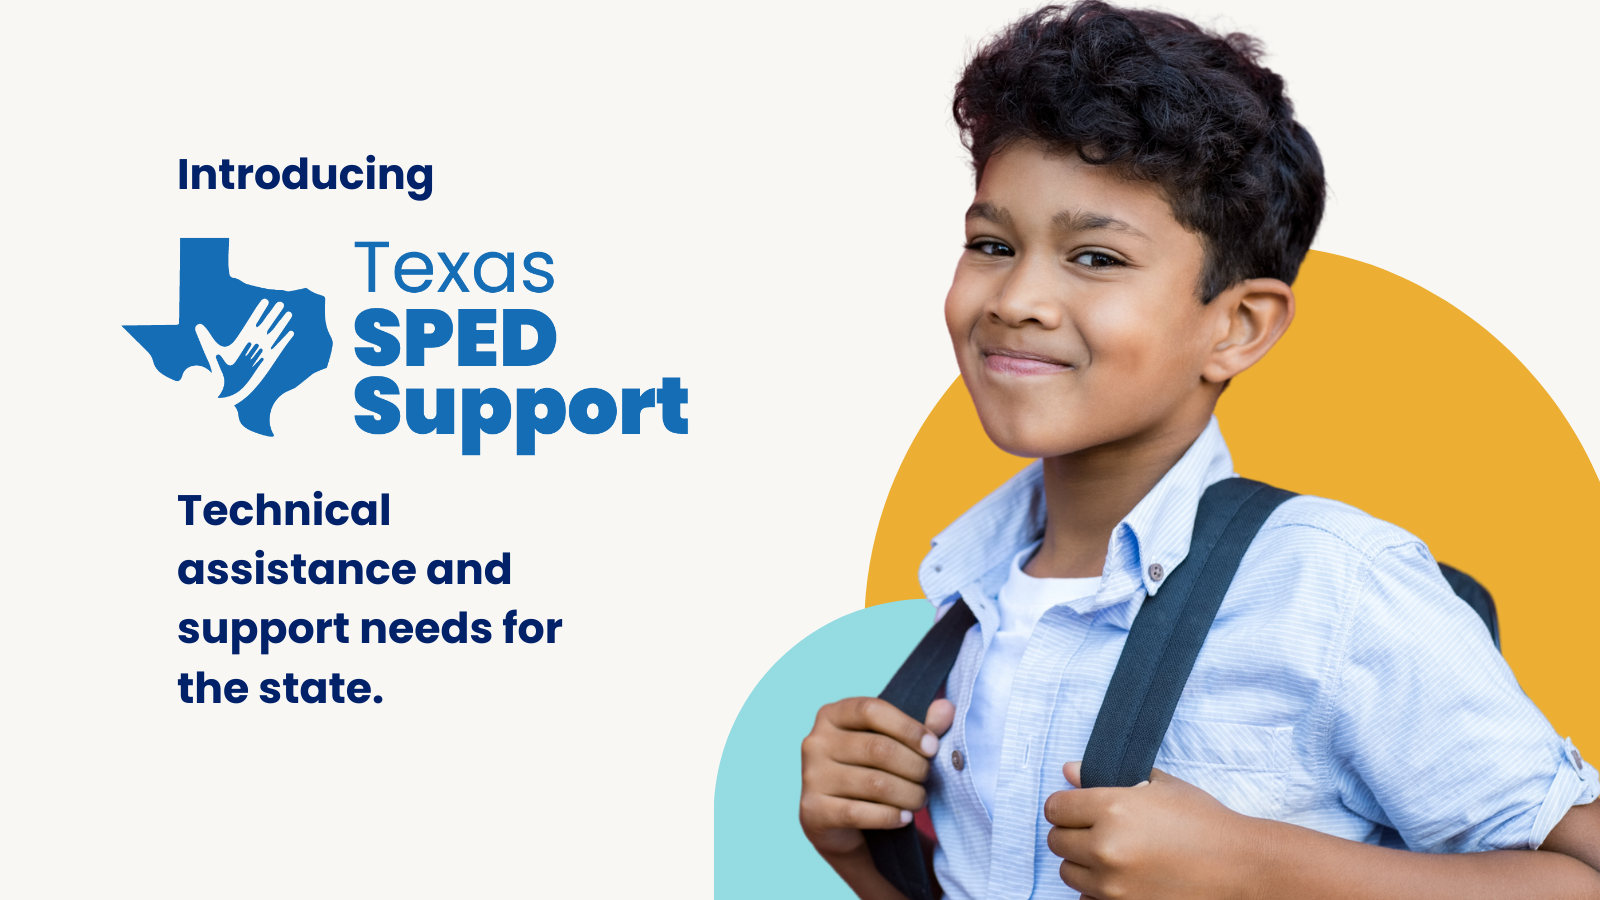 Introducint Texas SPED Support - Technical Assistance and support needs for the state.